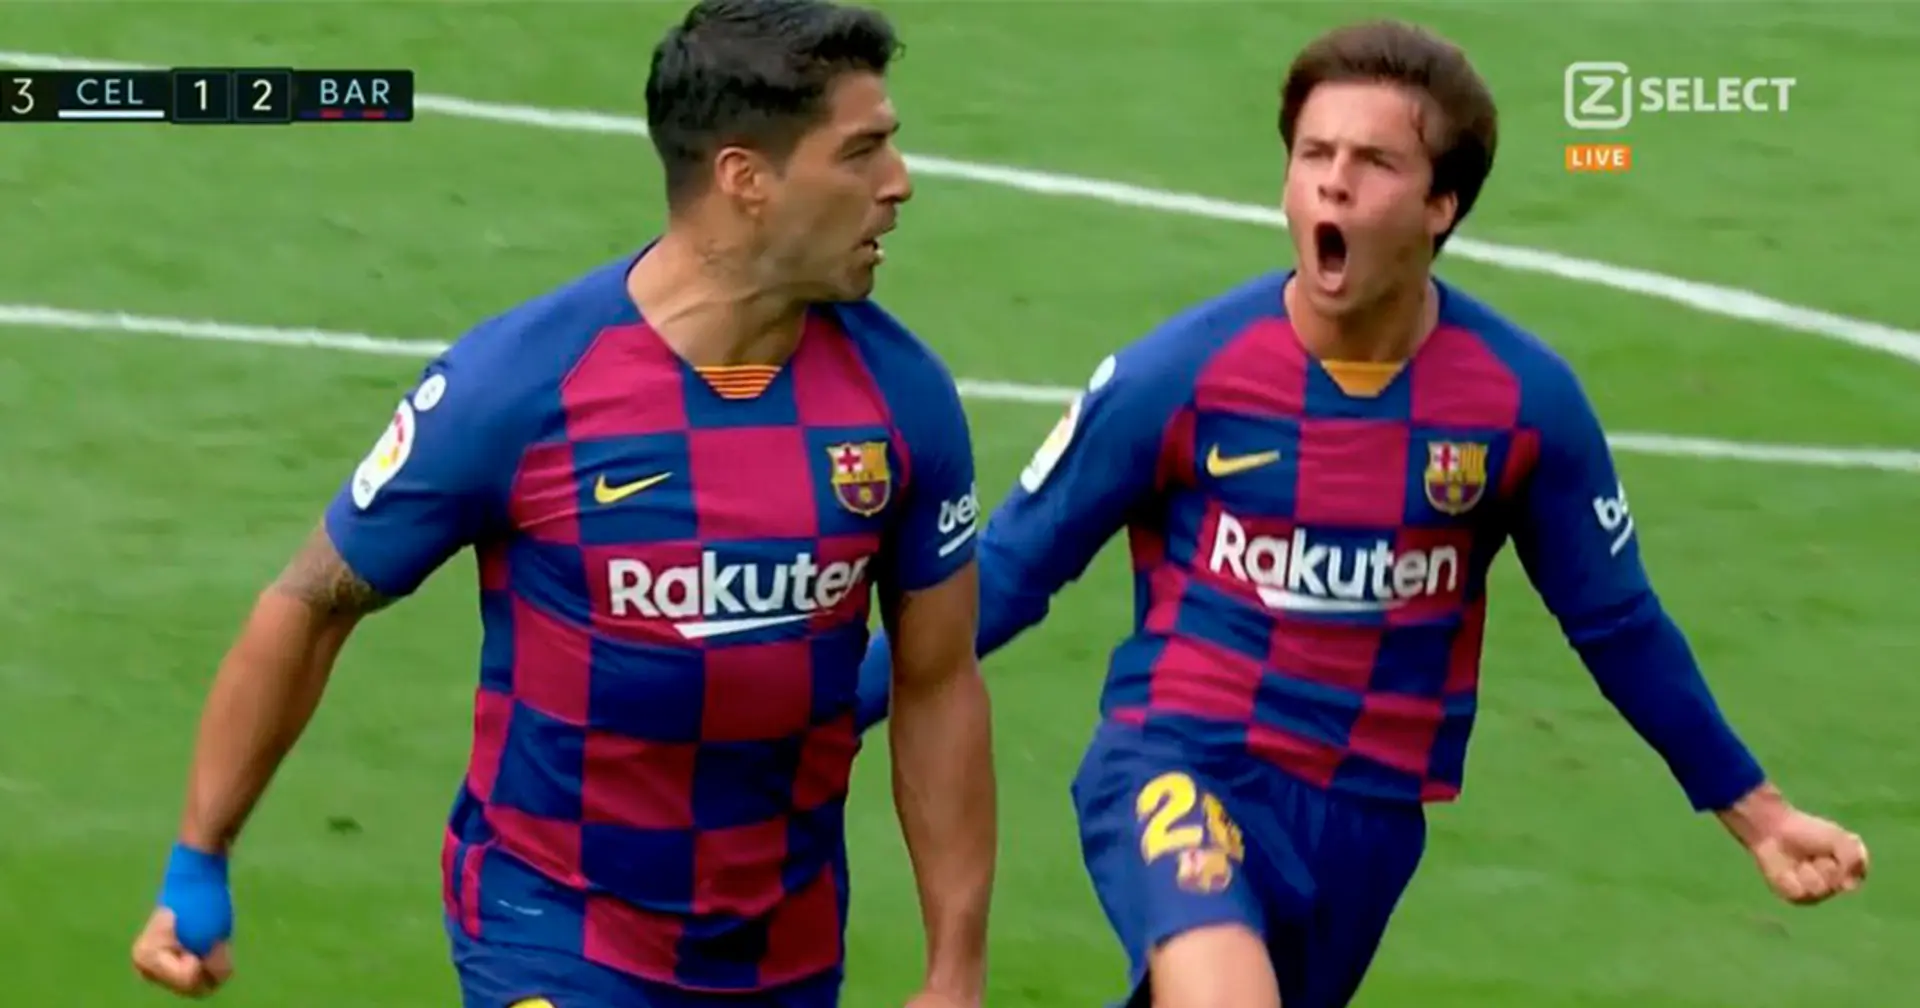 Luis Suarez set to reunite with Riqui Puig and 2 more under-radar stories of the day